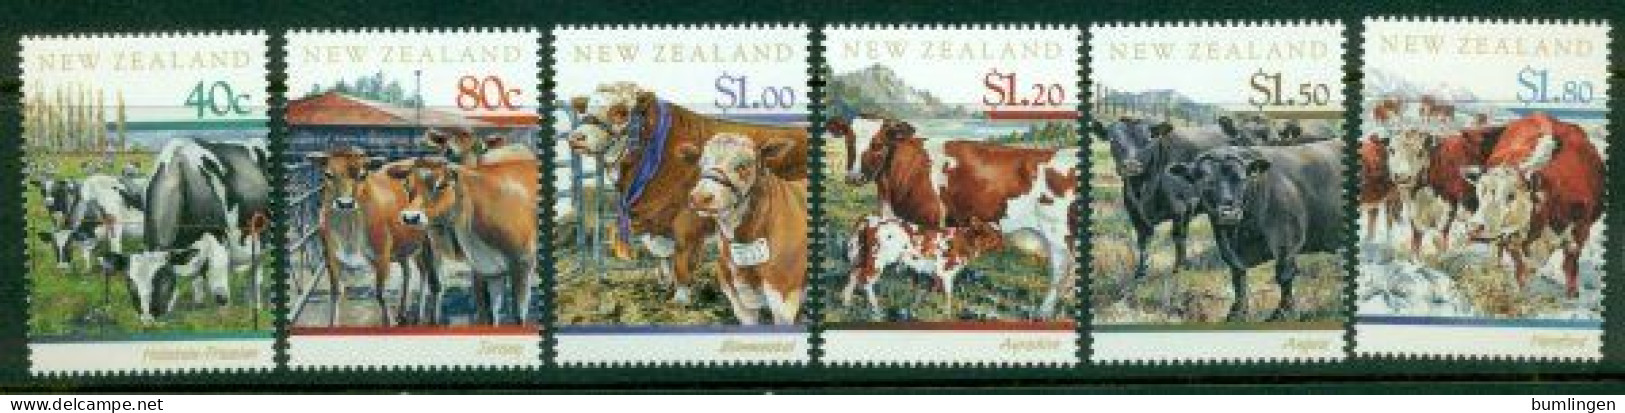 NEW ZEALAND 1997 Mi 1571-76A** Year Of The Ox – Cow Breeds [B1060] - Vacas